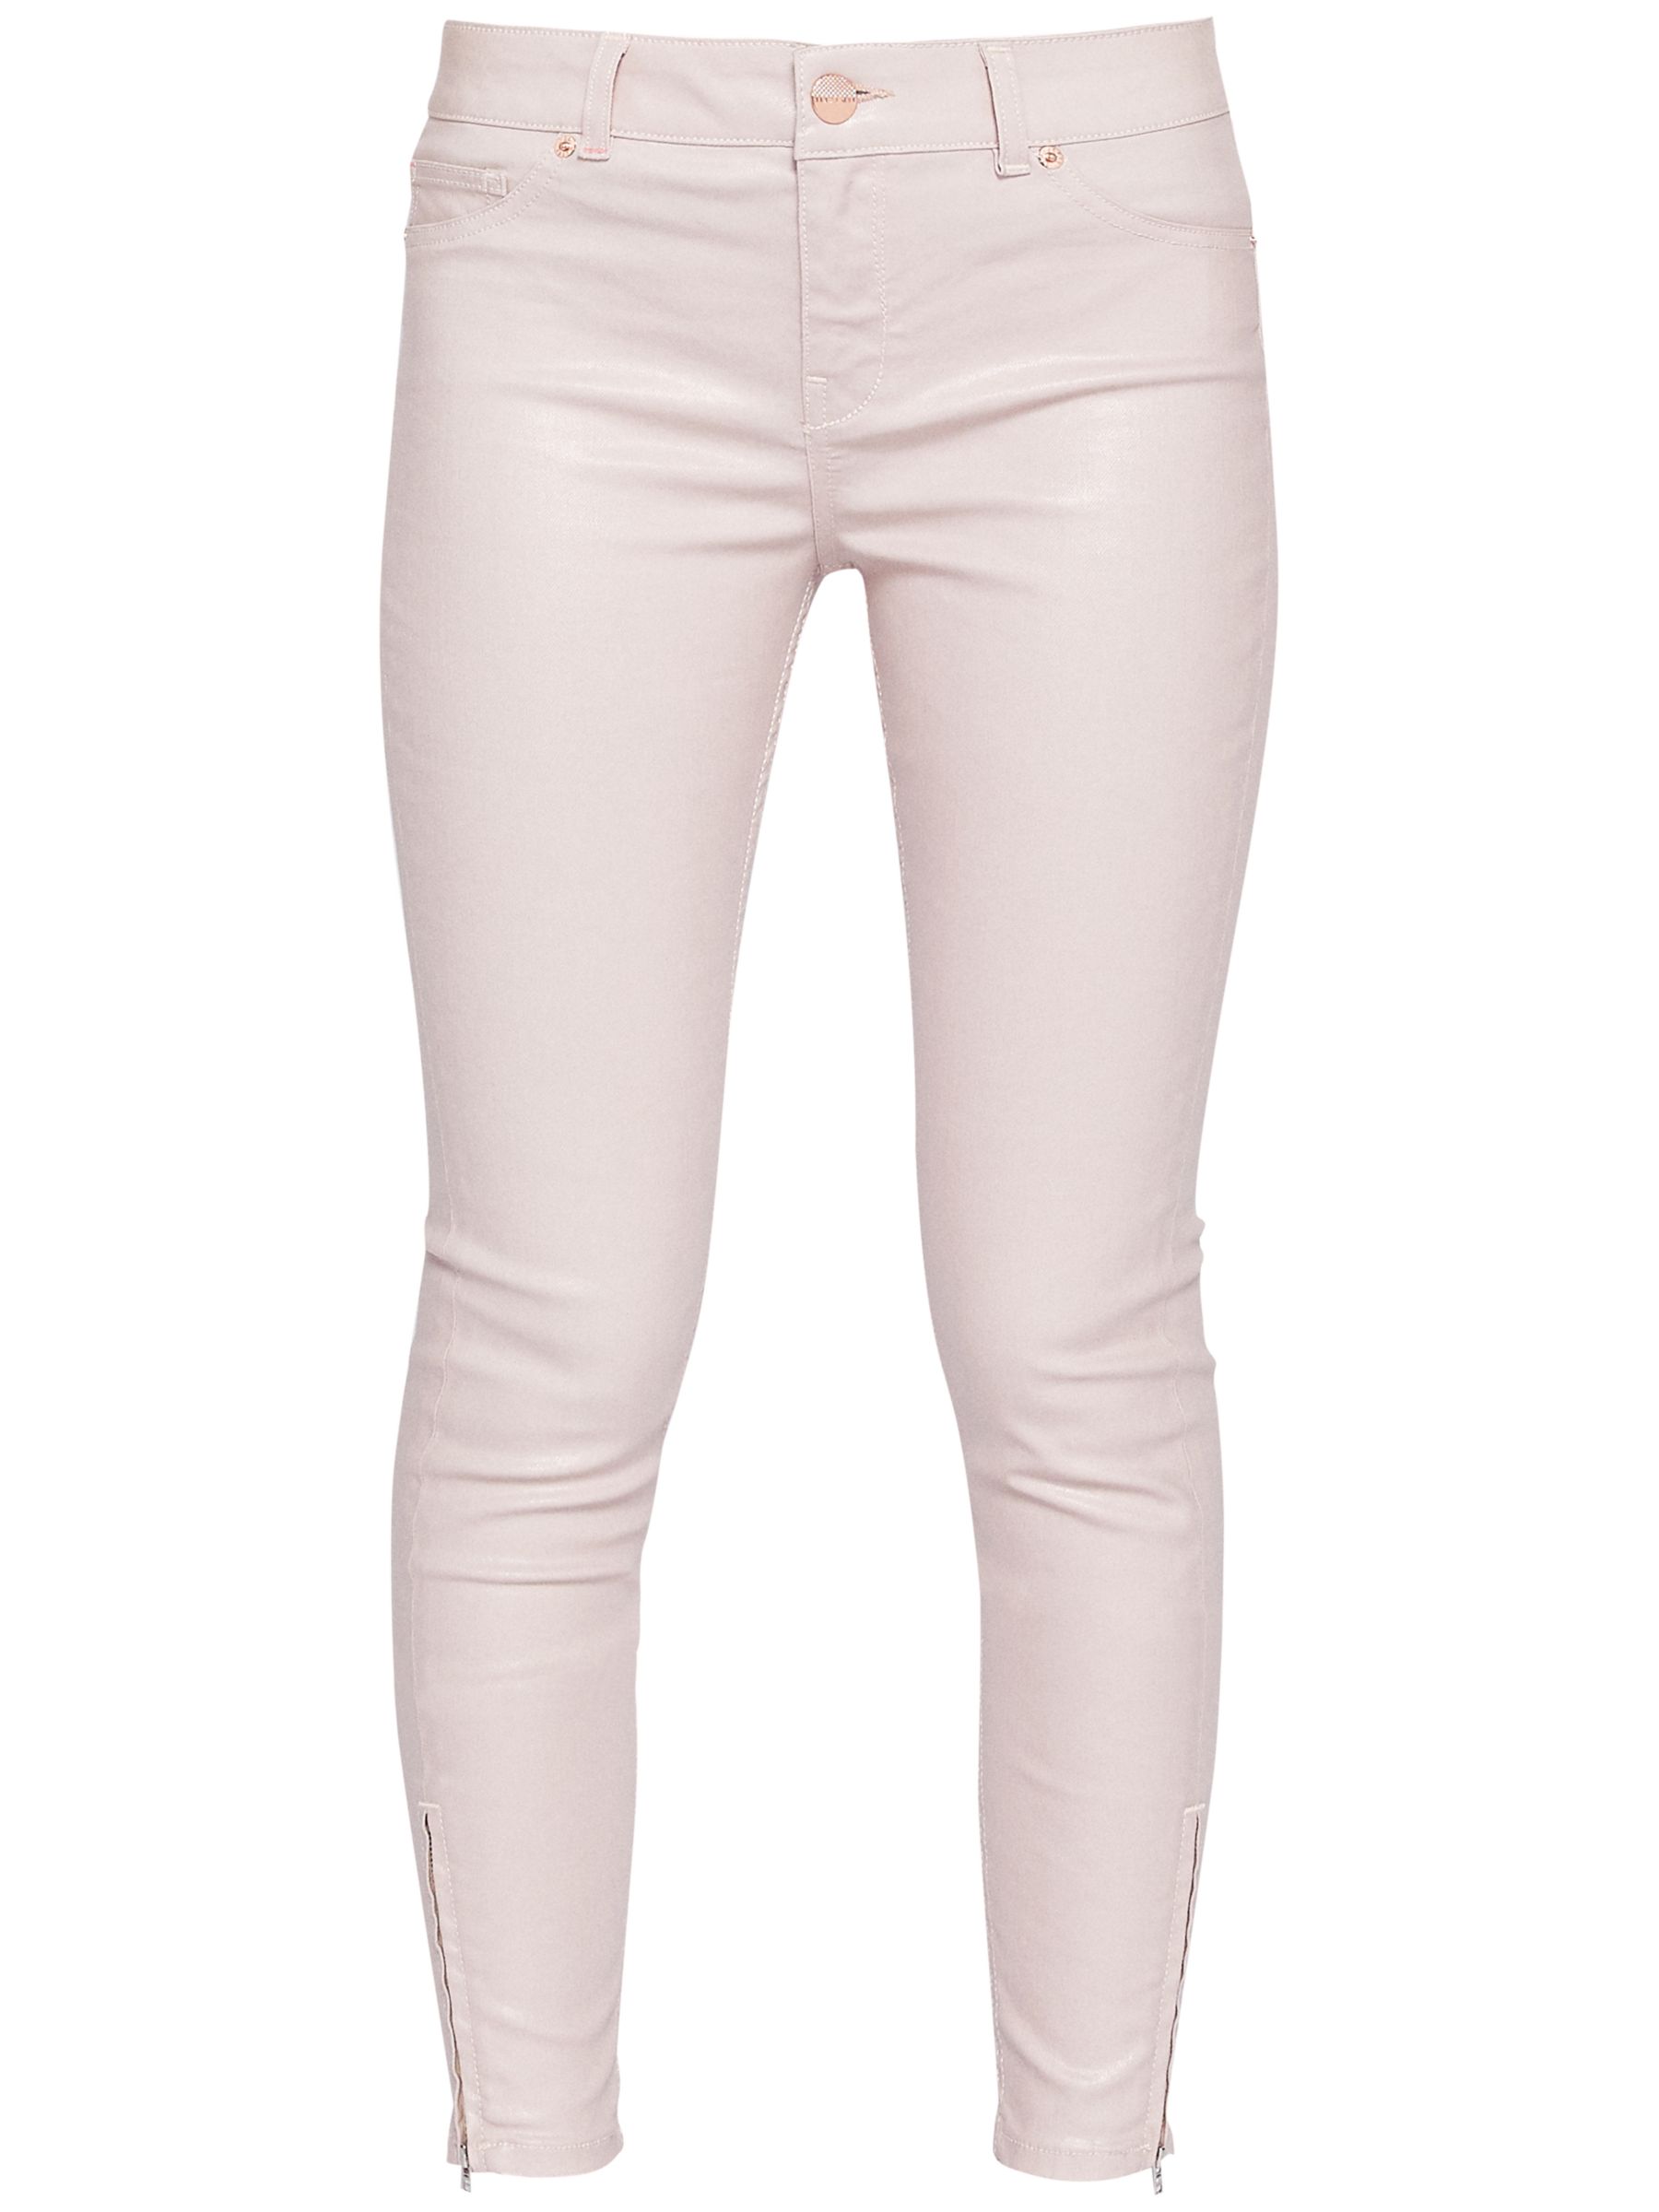 pink coated jeans